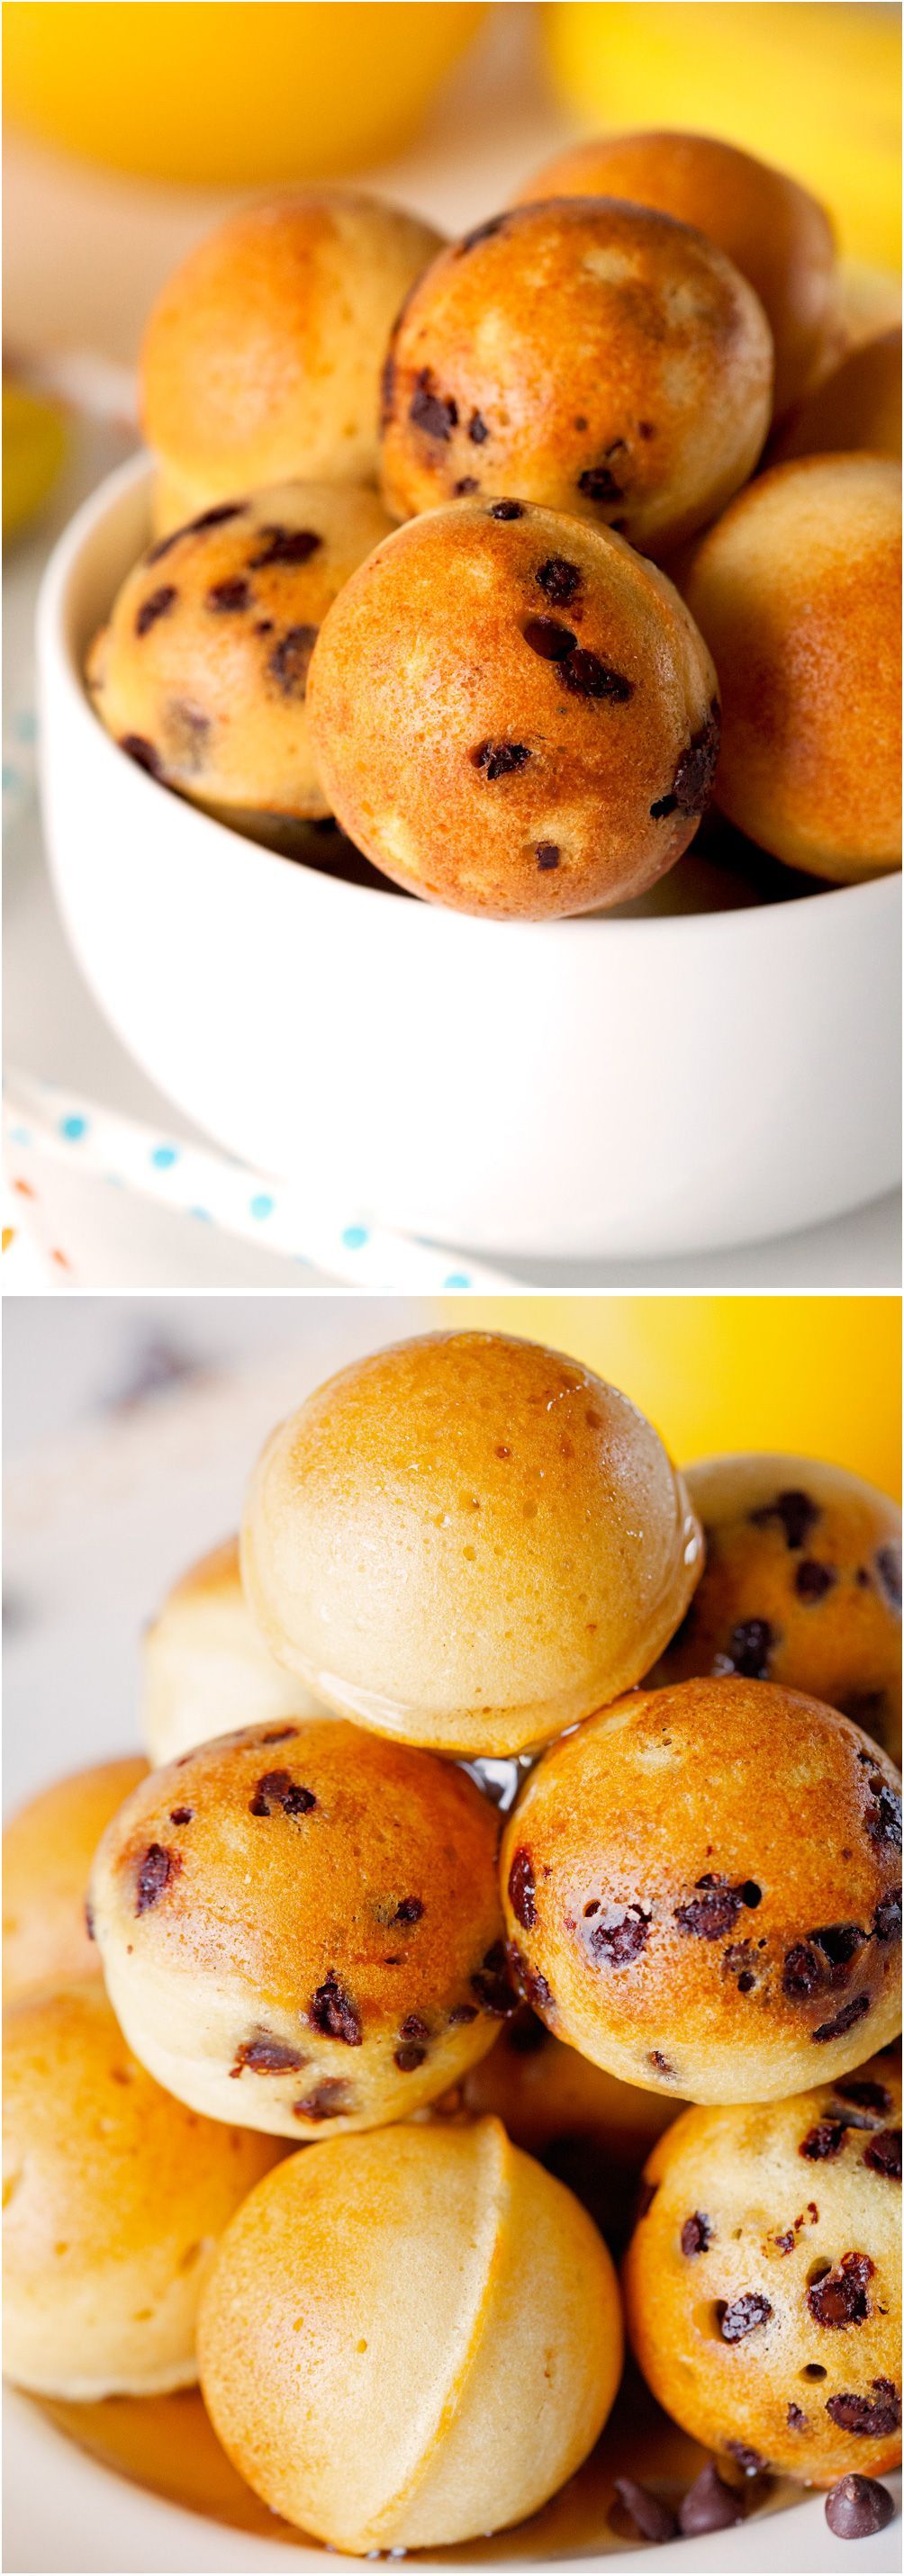 Pancake Poppers- these would be super cute for a brunch shower or slumber party